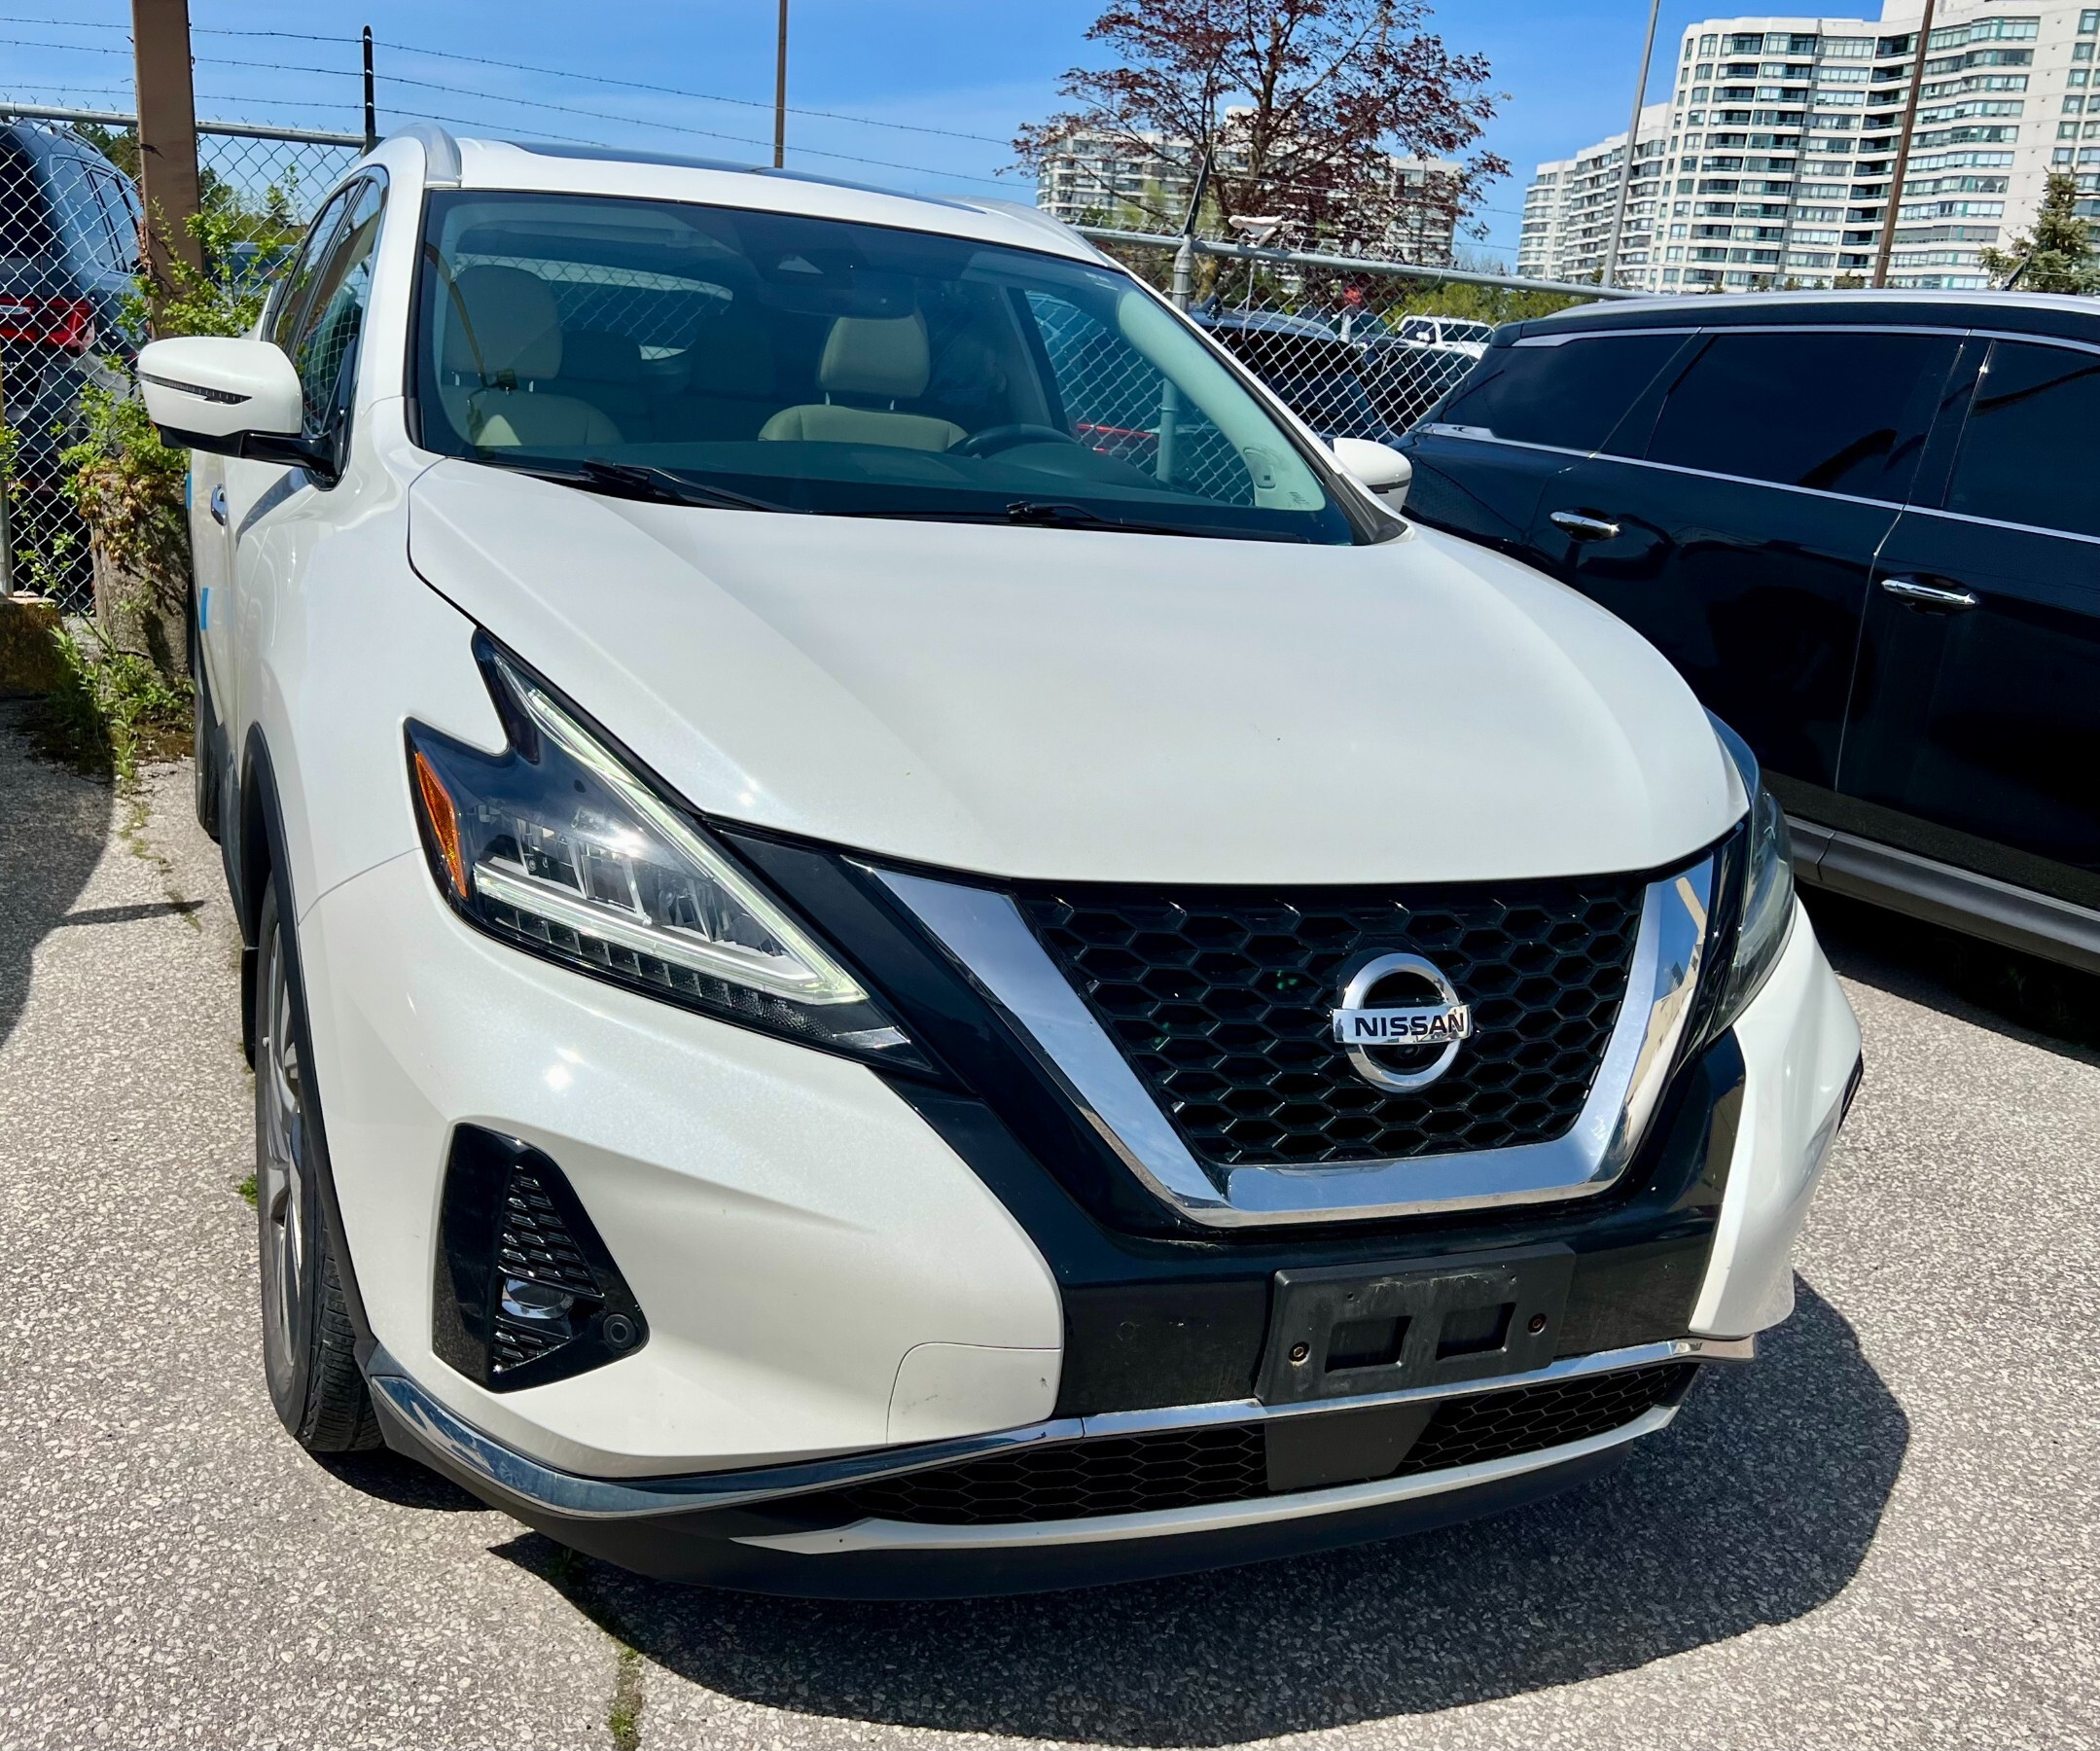 2020 Nissan Murano SL - SALE EVENT MAY 24- MAY 25